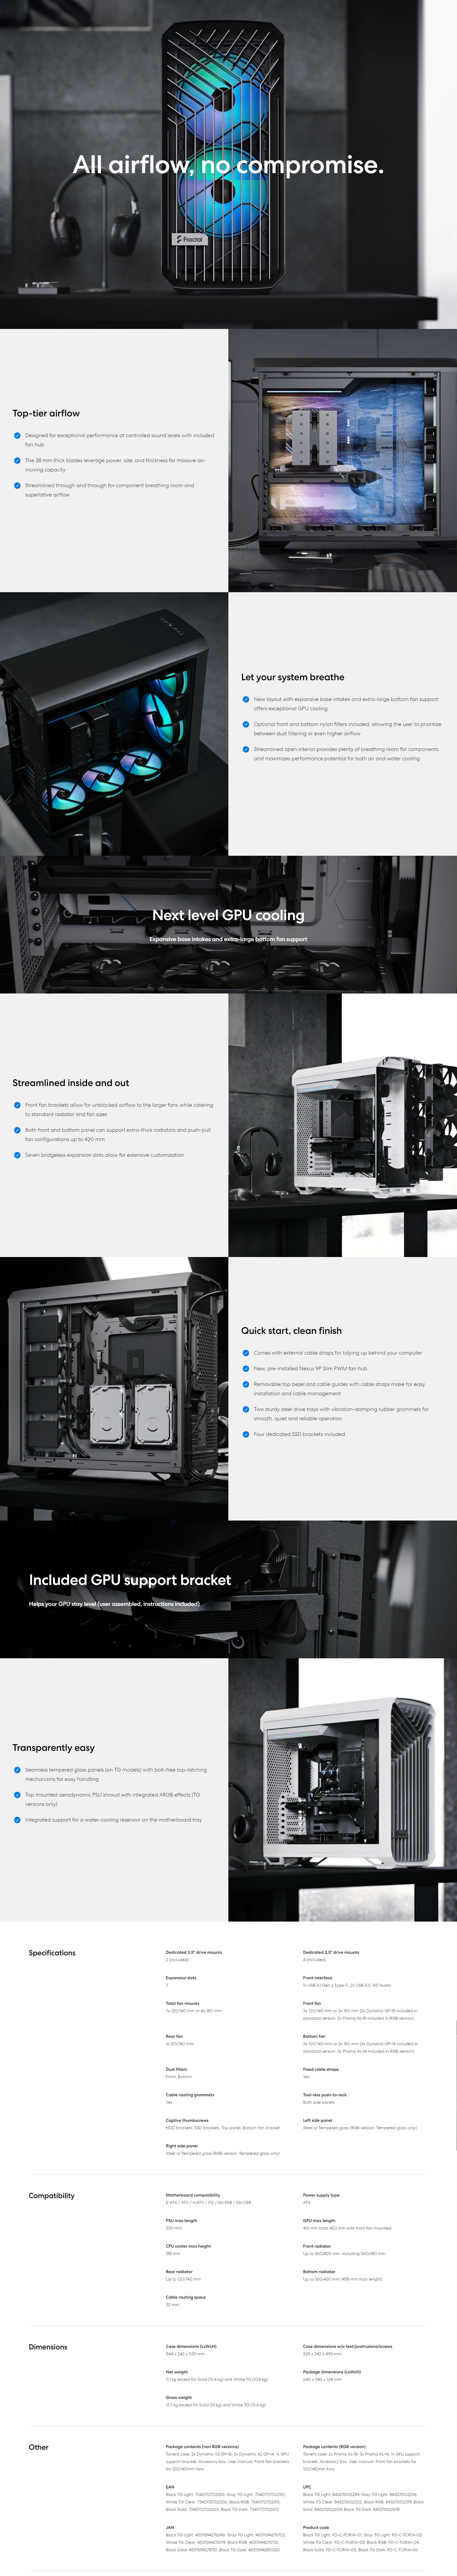 A large marketing image providing additional information about the product Fractal Design Torrent TG Clear Tint Mid Tower Case - White - Additional alt info not provided